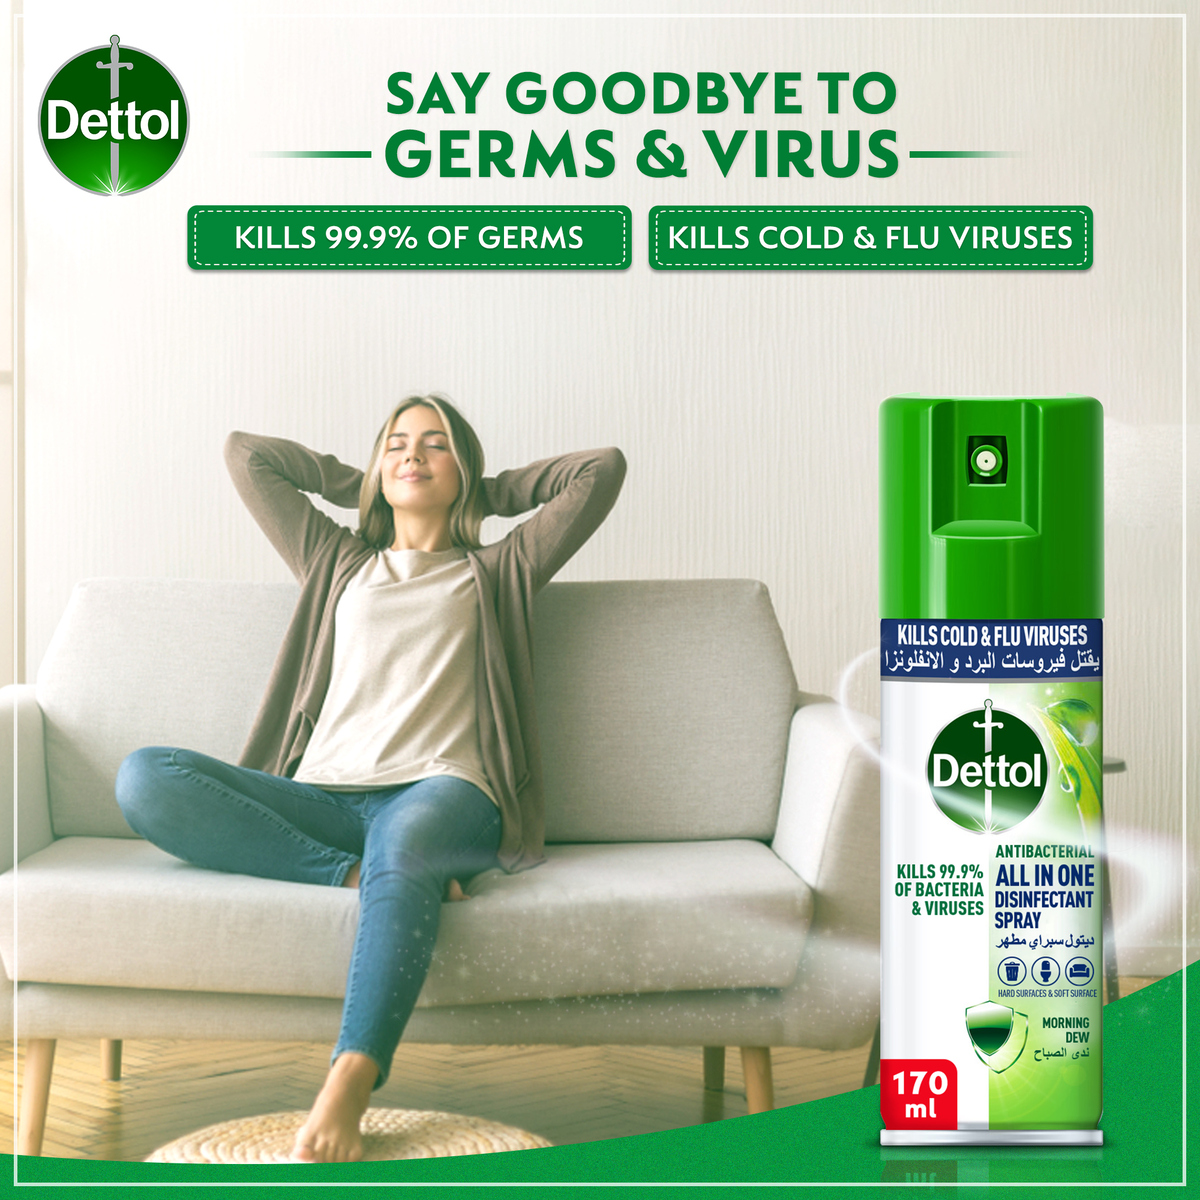 Dettol All In One Morning Dew Antibacterial Disinfectant Spray, 170 ml